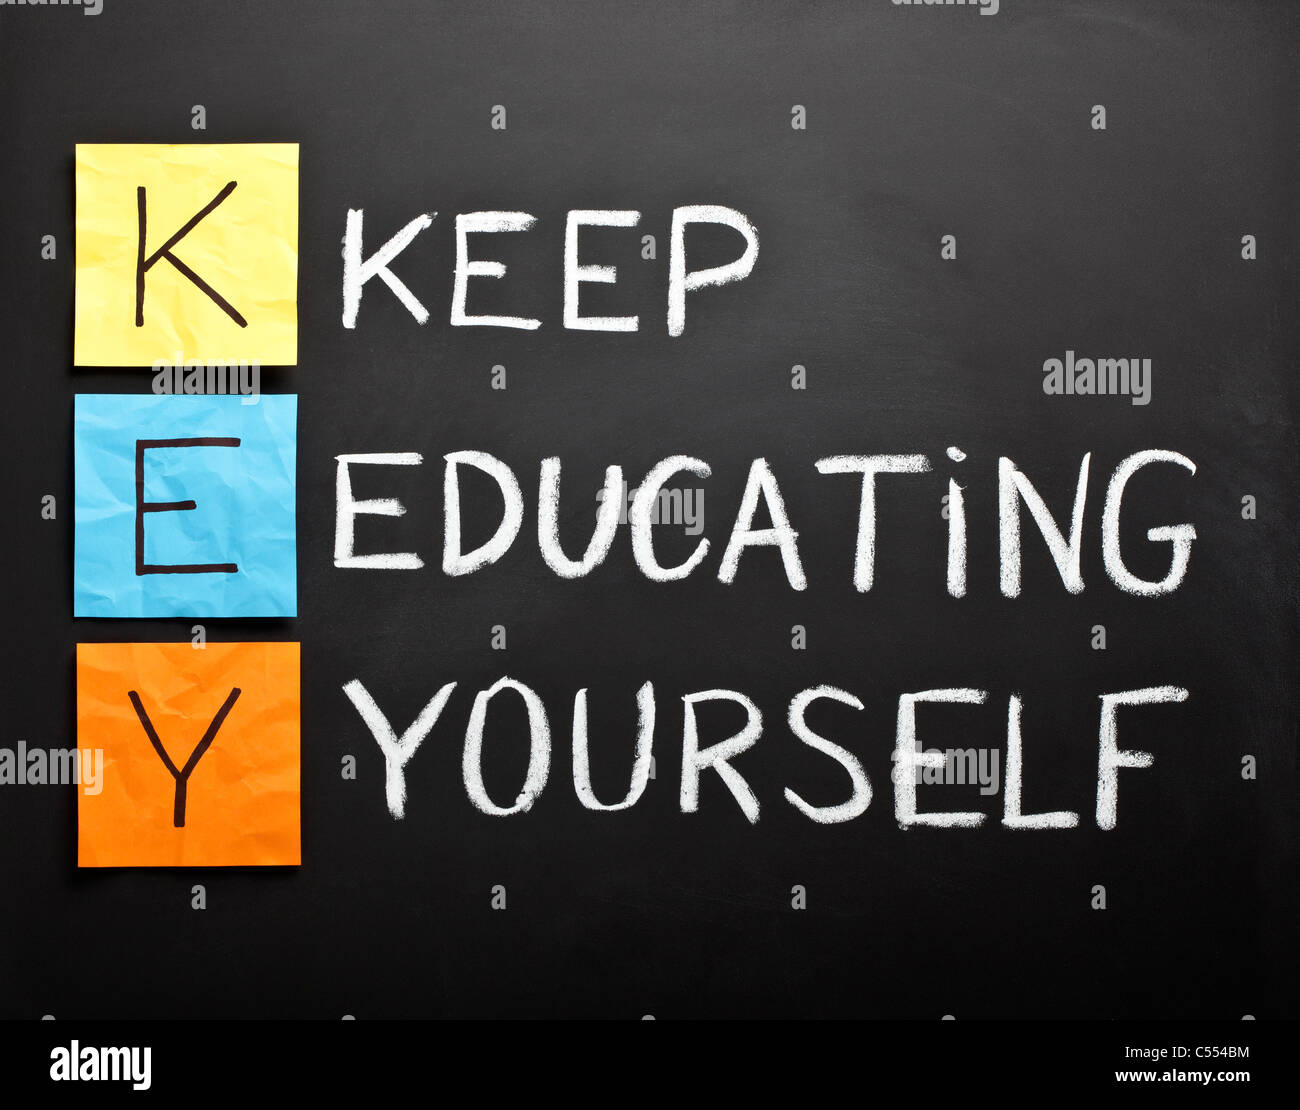 KEY acronym - KEEP EDUCATING YOURSELF. Educational concept with color sticky notes and white chalk handwriting on a blackboard. Stock Photo